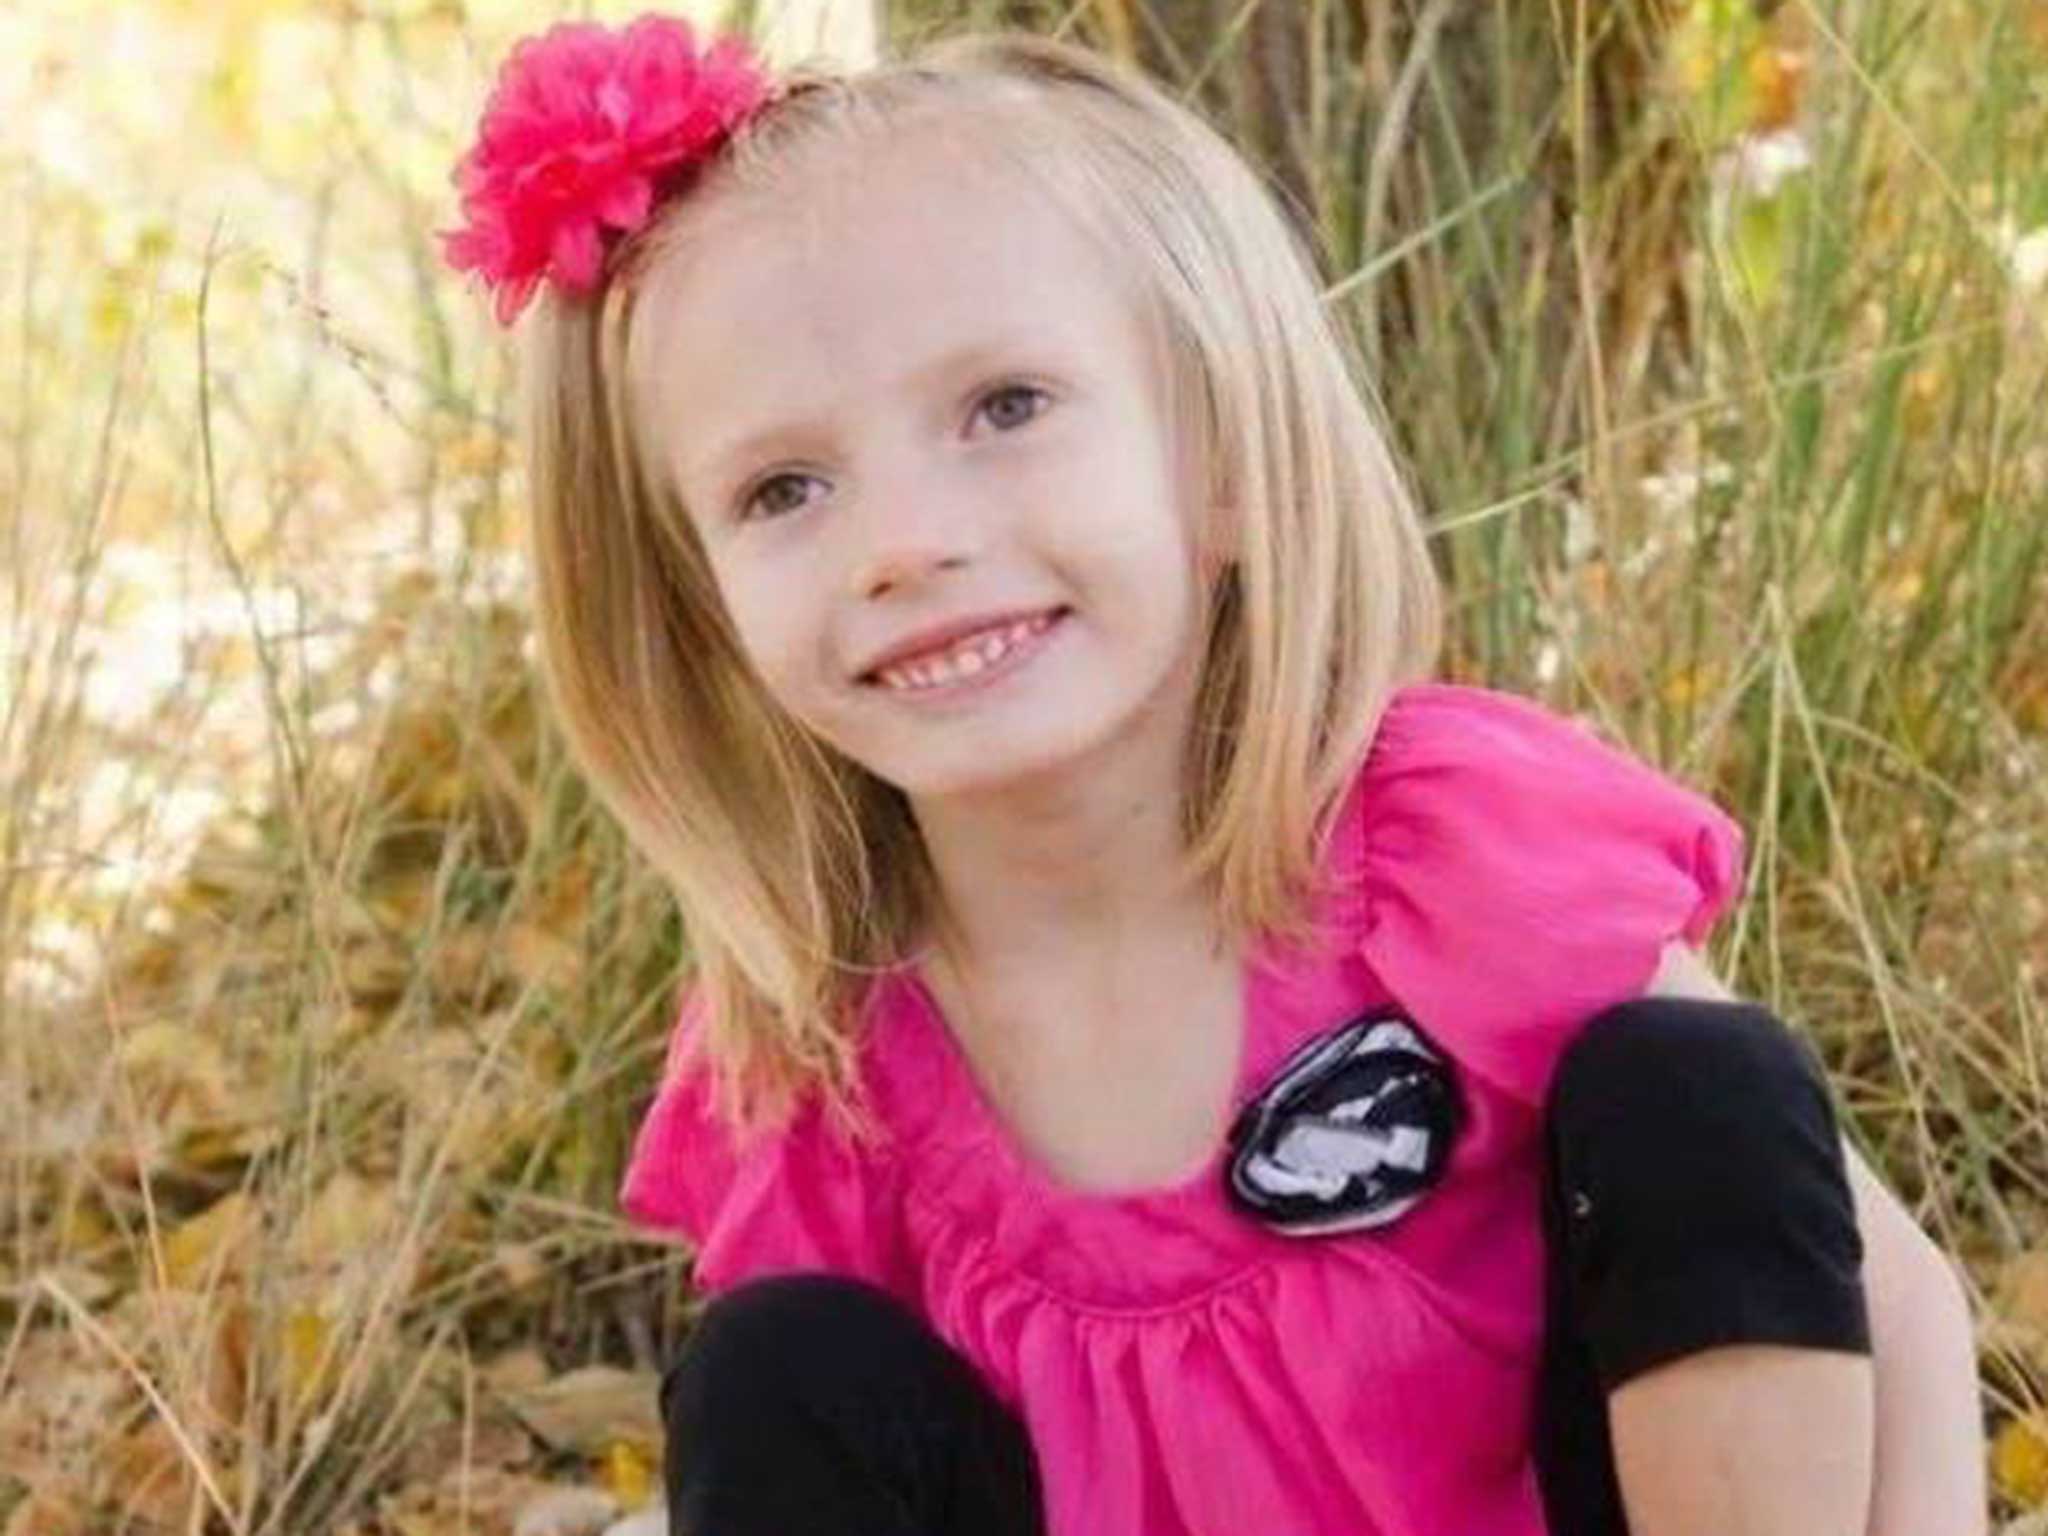 Addie is only six-year-old and has less than a year to live